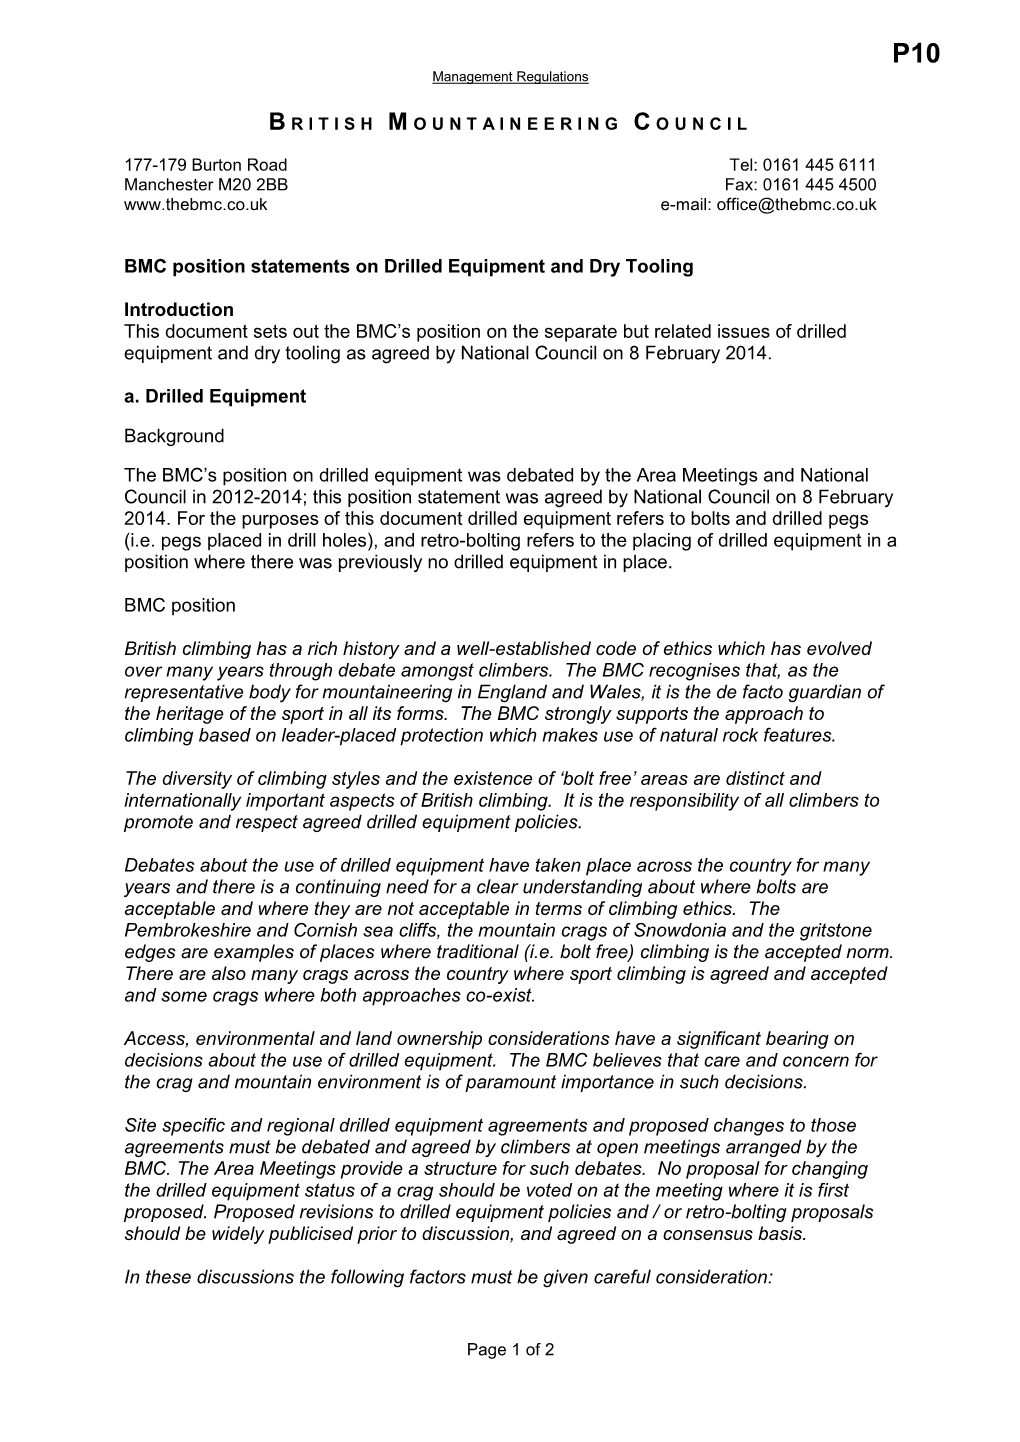 BMC Position Statement on Drilled Equipment and Dry Tooling